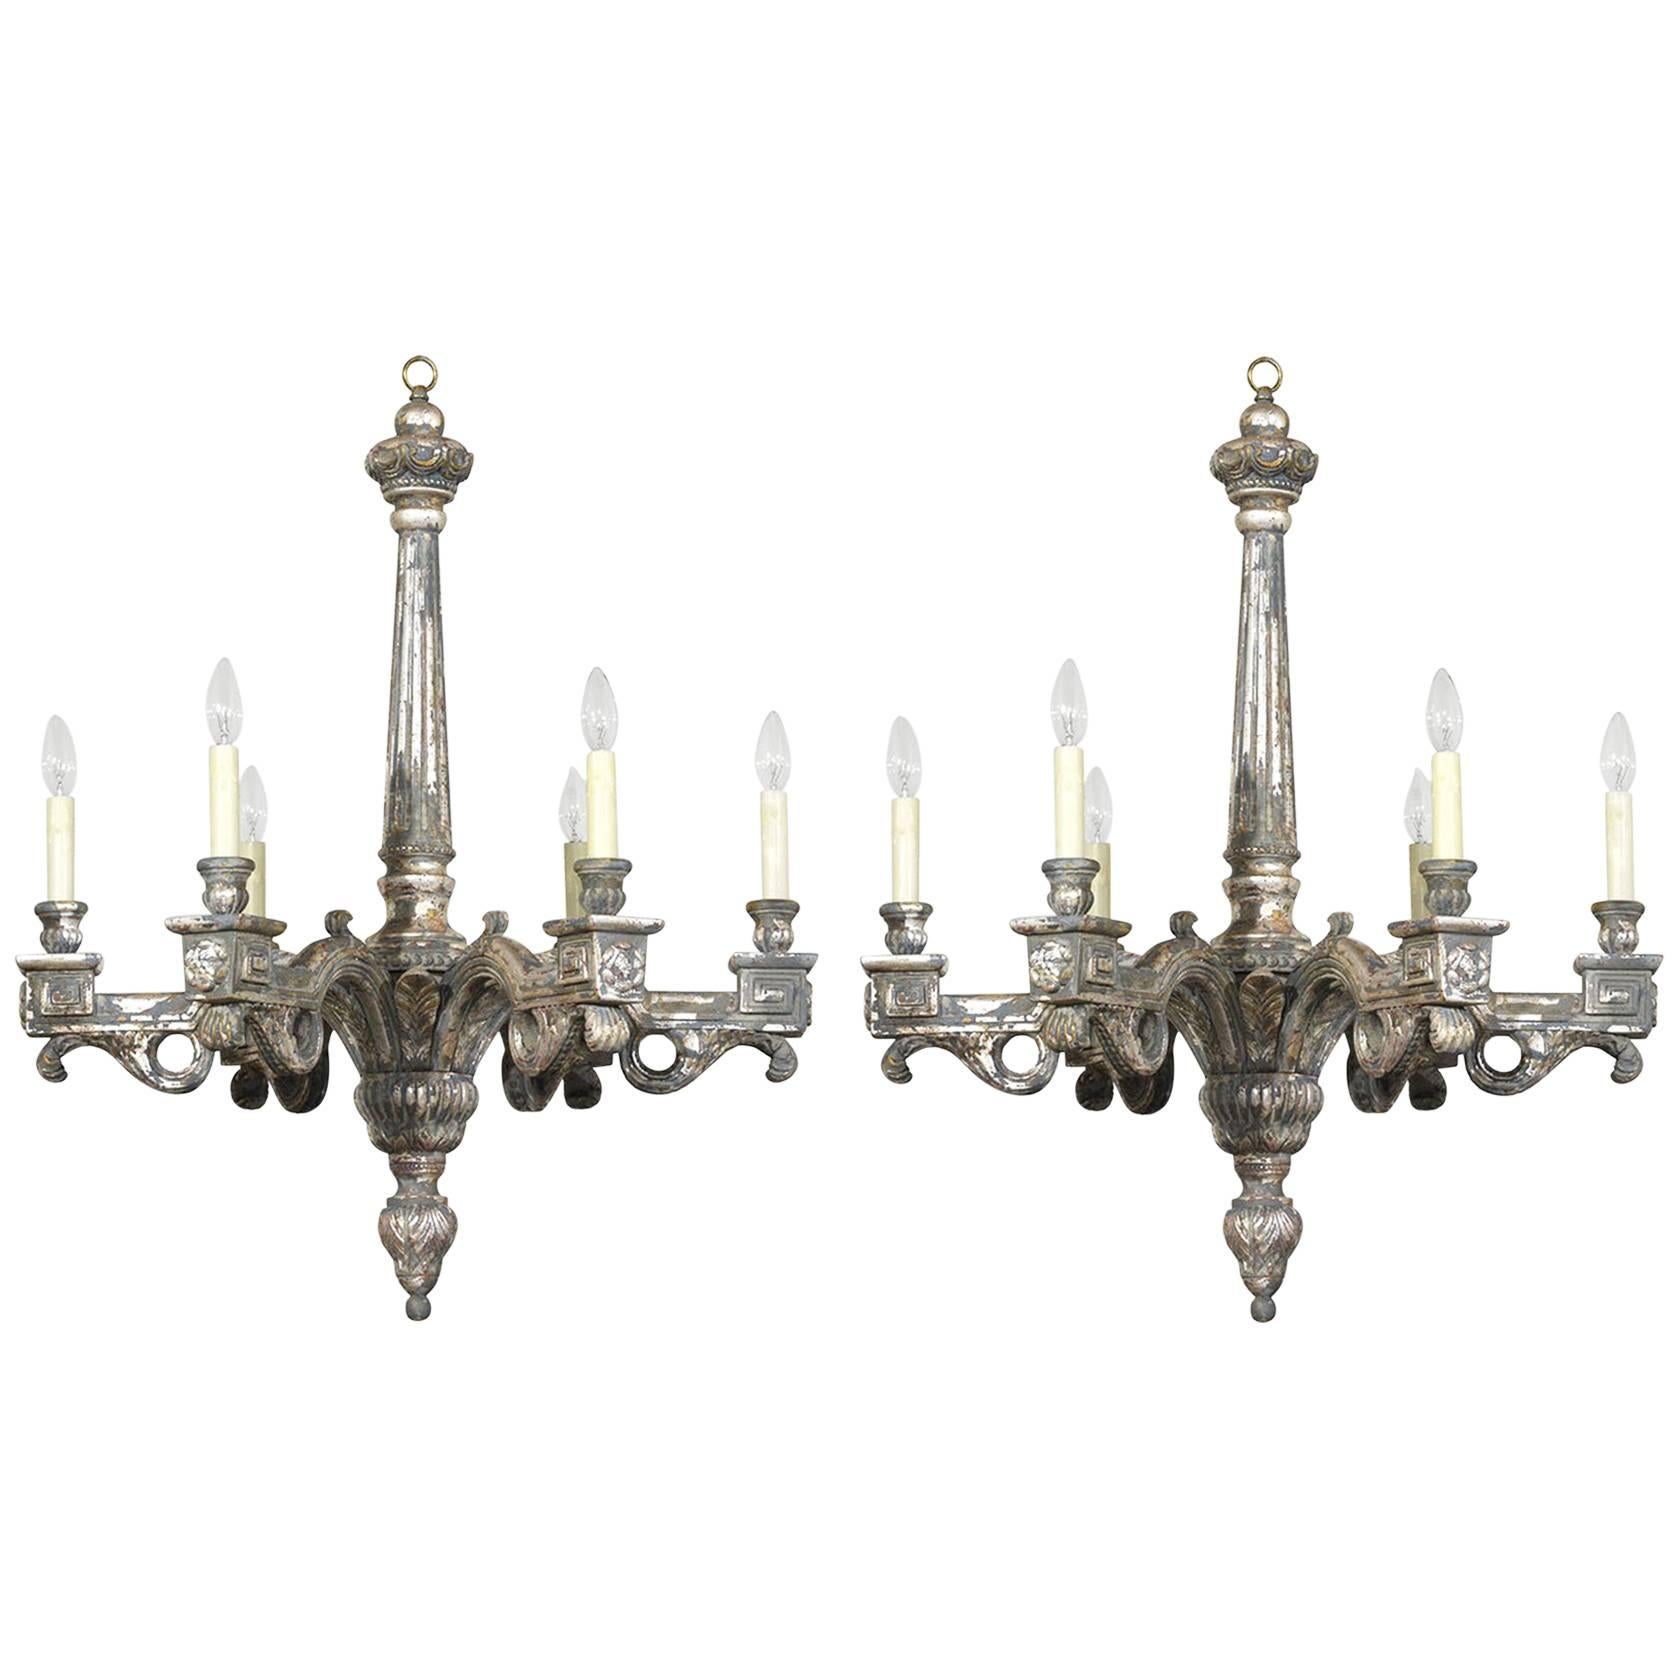 Pair of Six-Light Italian Neoclassical-Style Silver Leaf Carved Wood Chandeliers